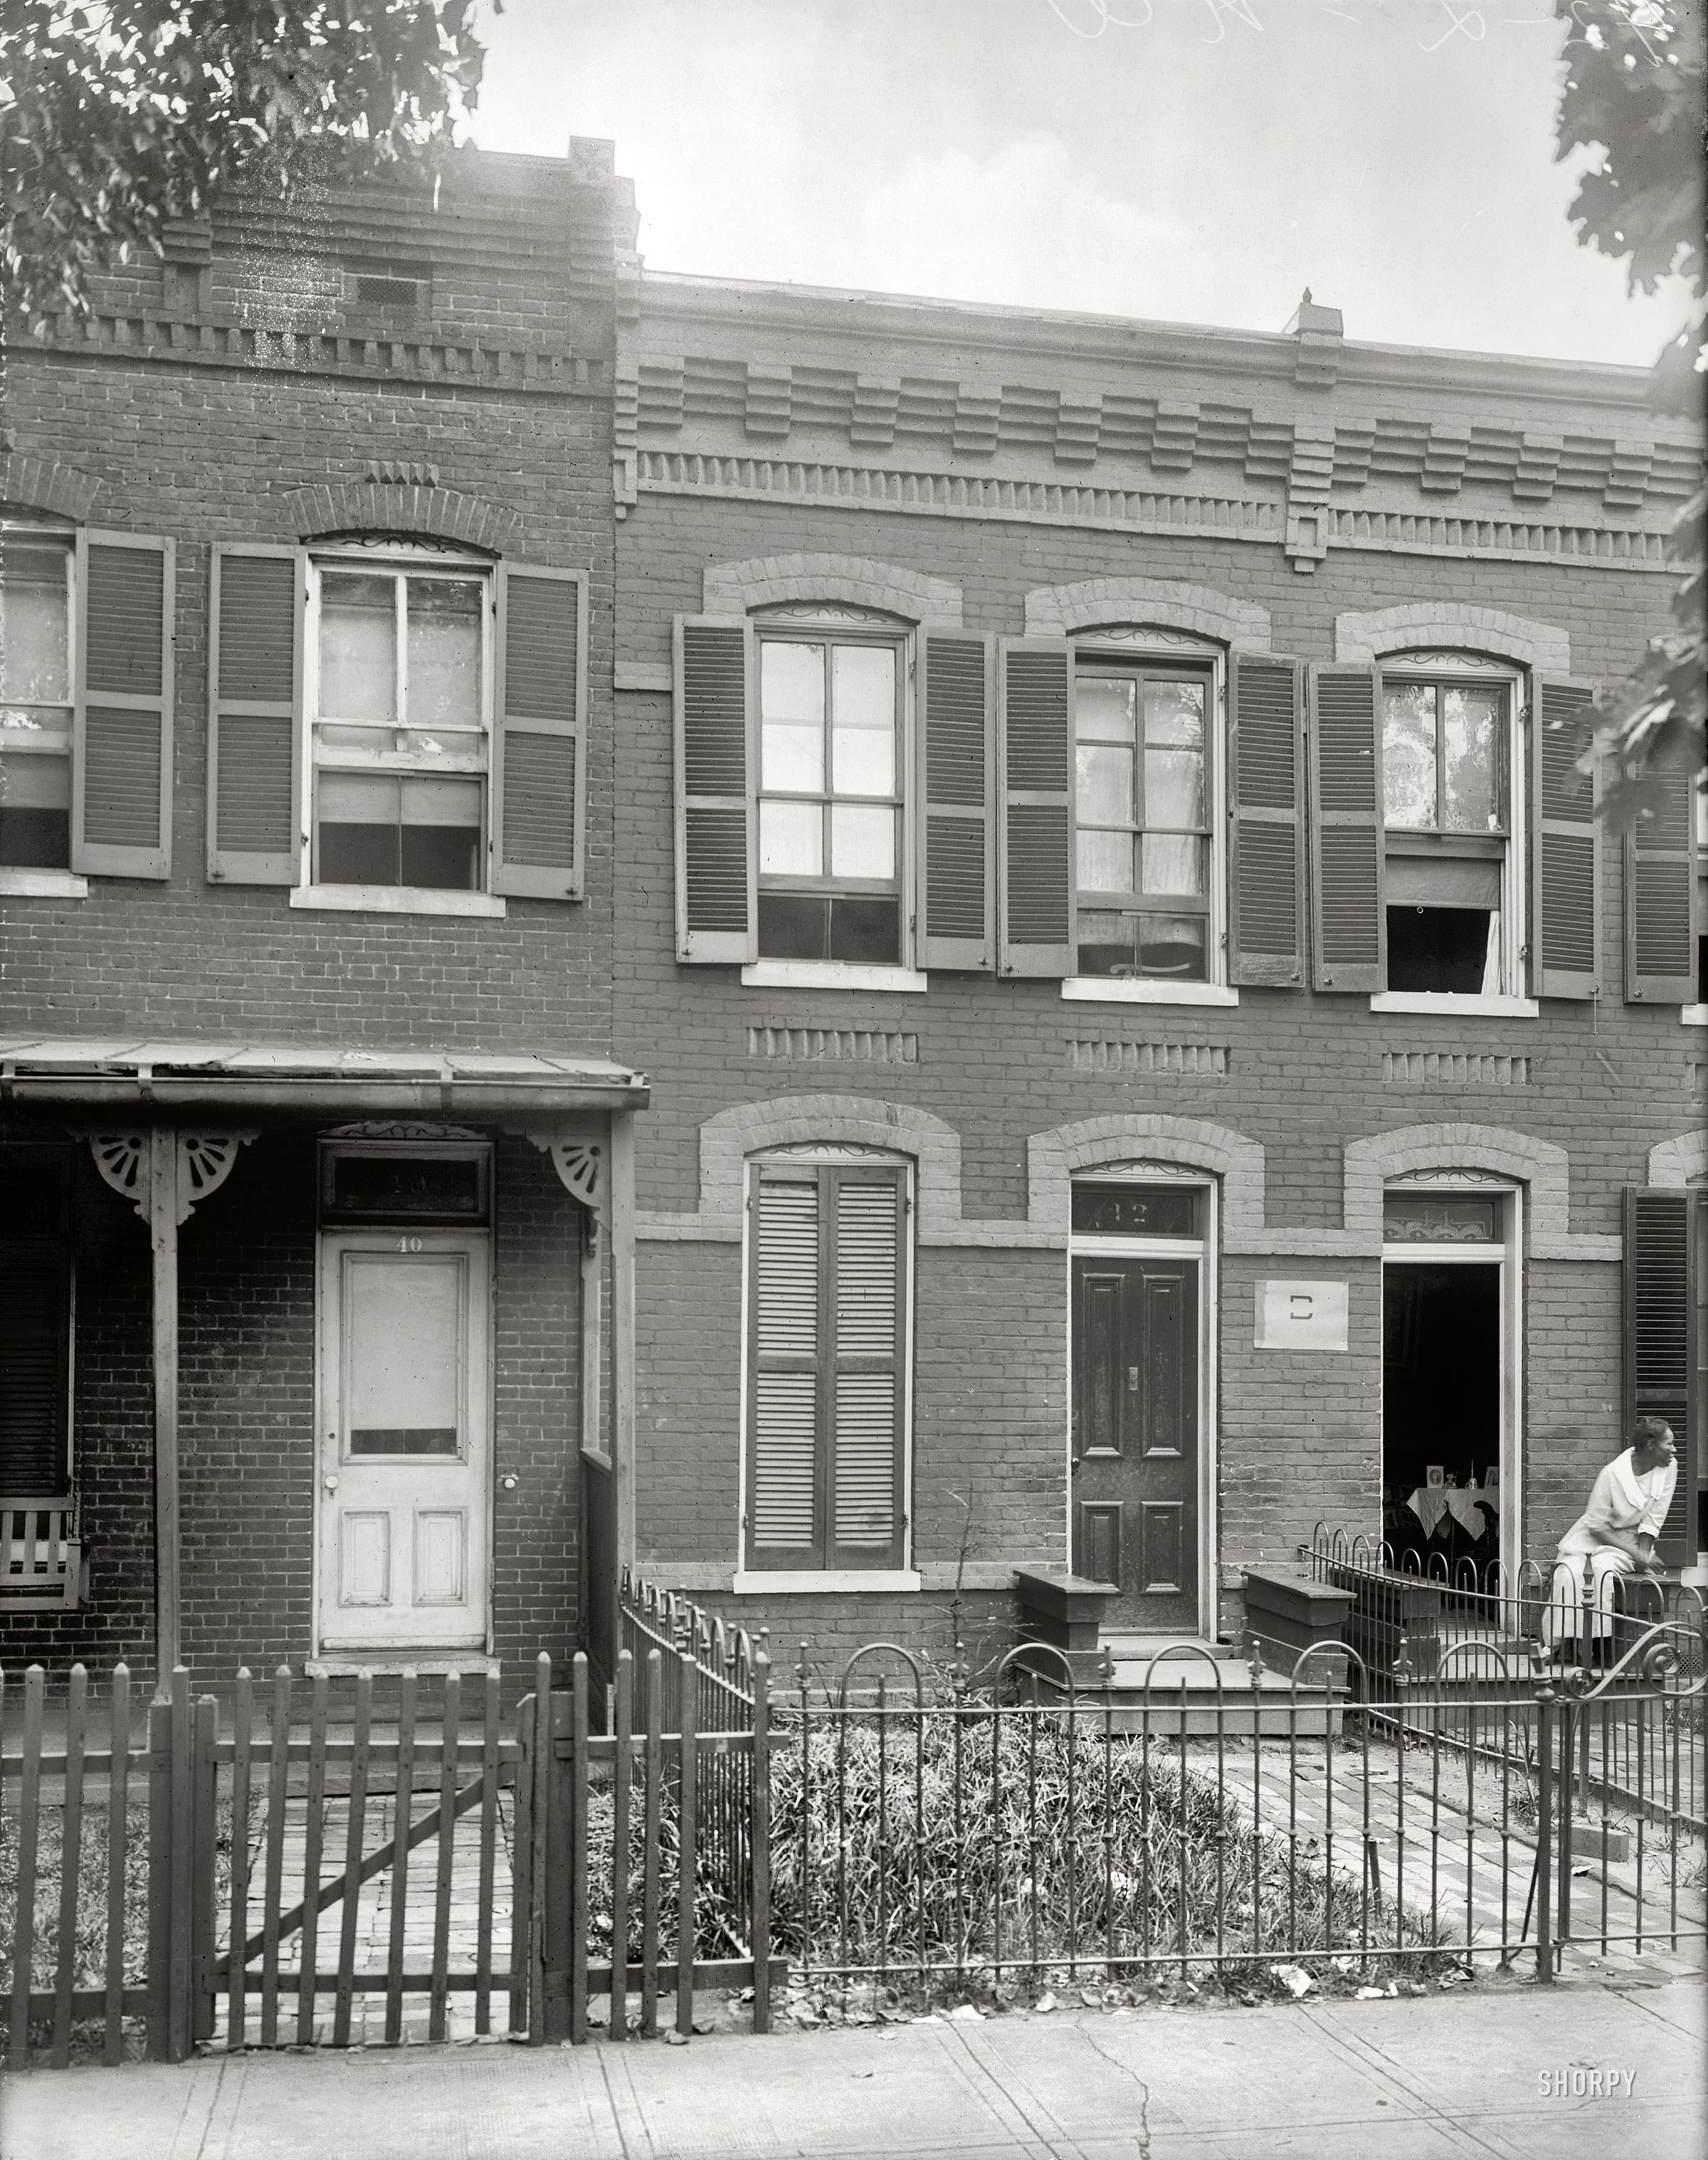 Washington, D.C., circa 1922. "Washington Times -- 42 L Street N.W." Photo of a long-vanished row house made in connection with a real estate listing. National Photo Company Collection glass negative. View full size.